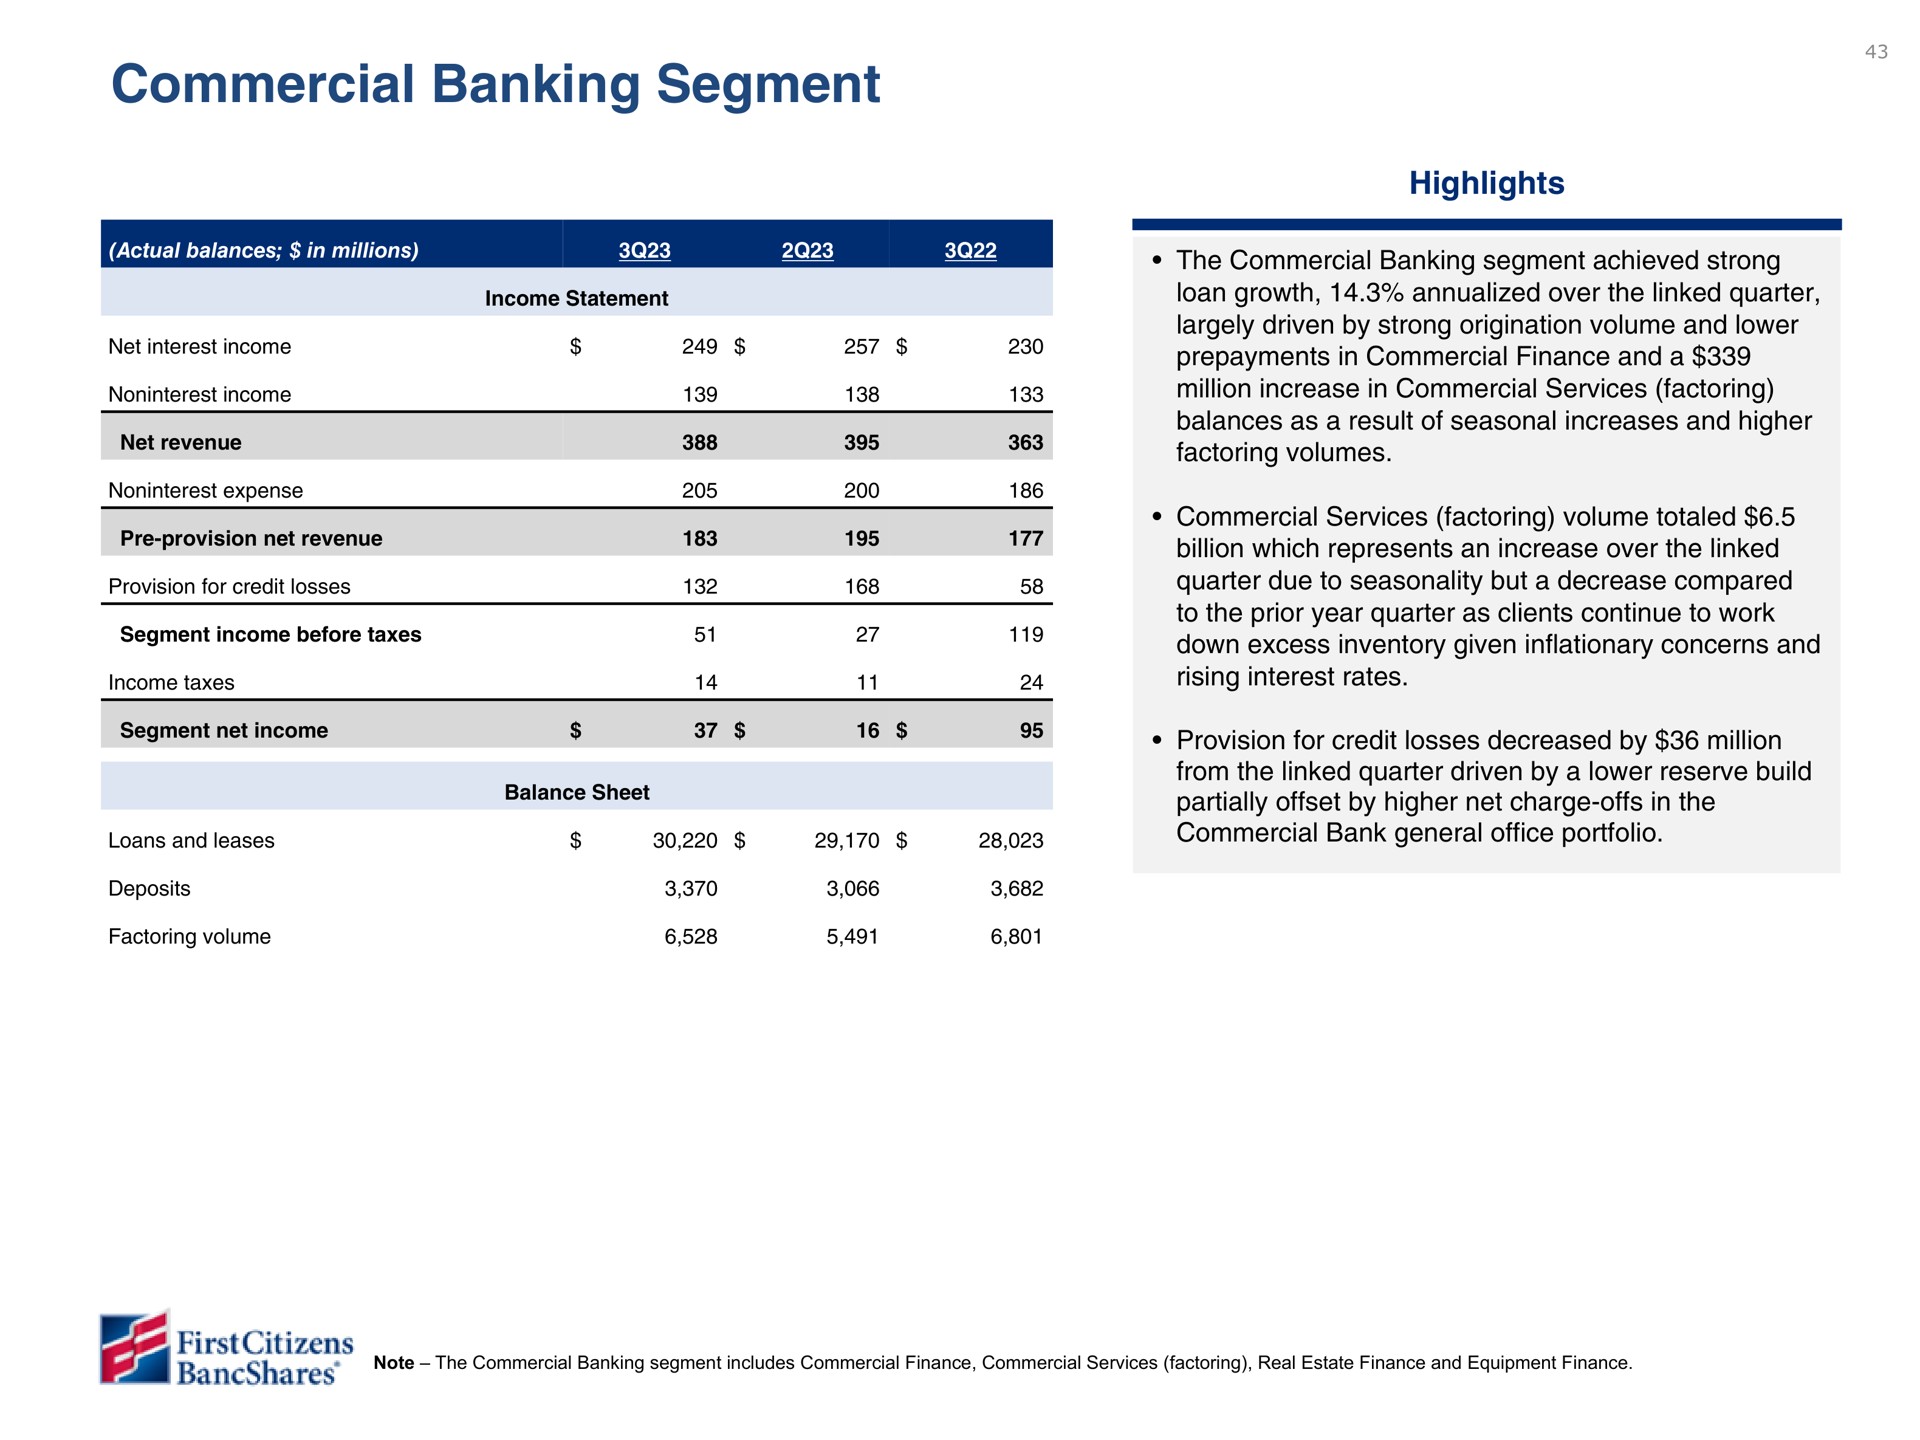 commercial banking segment | First Citizens BancShares